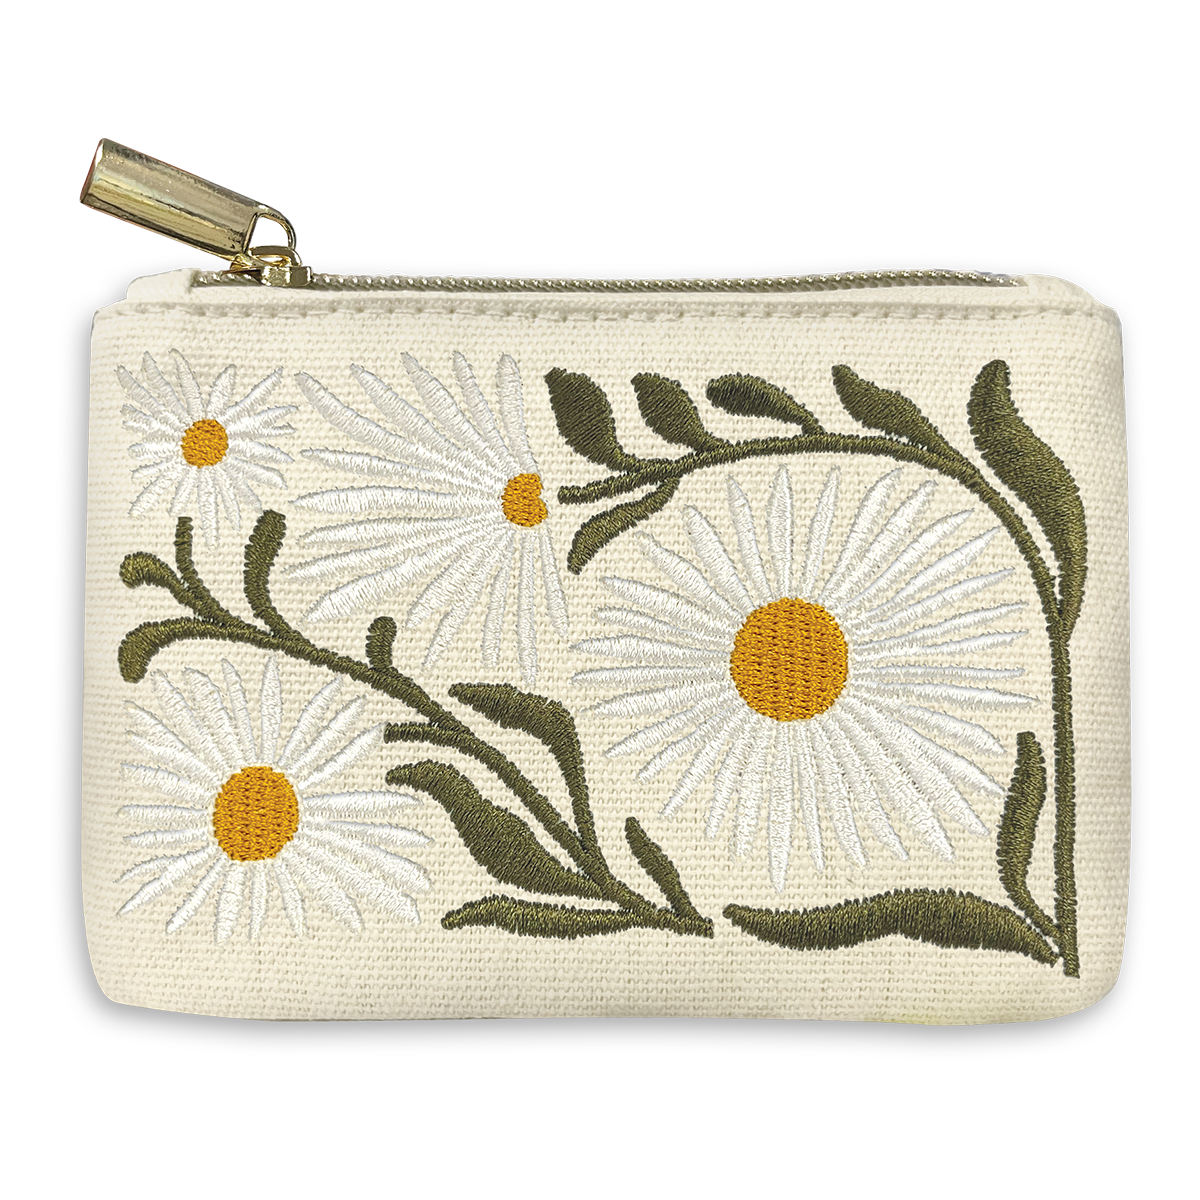 Daisy Rose Women's Round Coin Purse Pouch